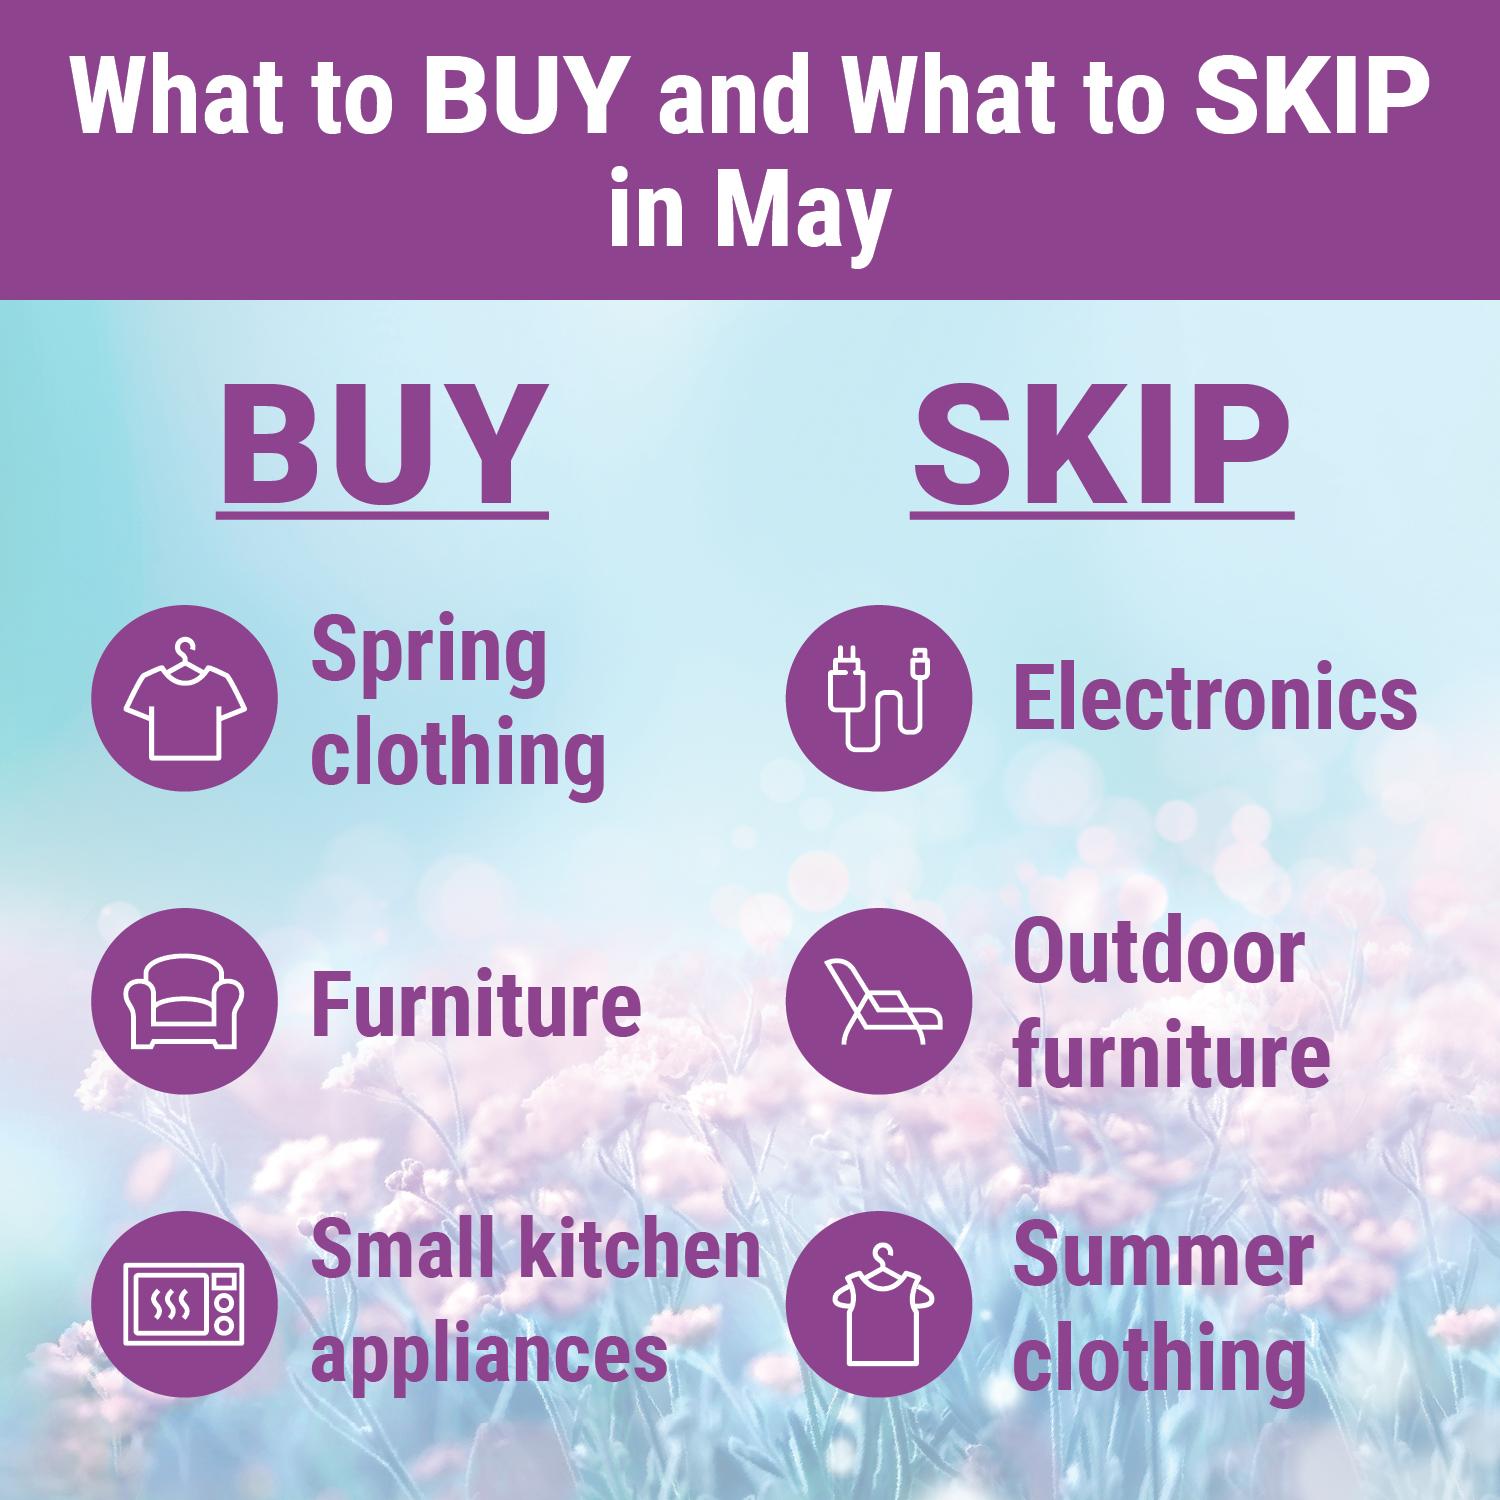 What to Buy and Skip in May